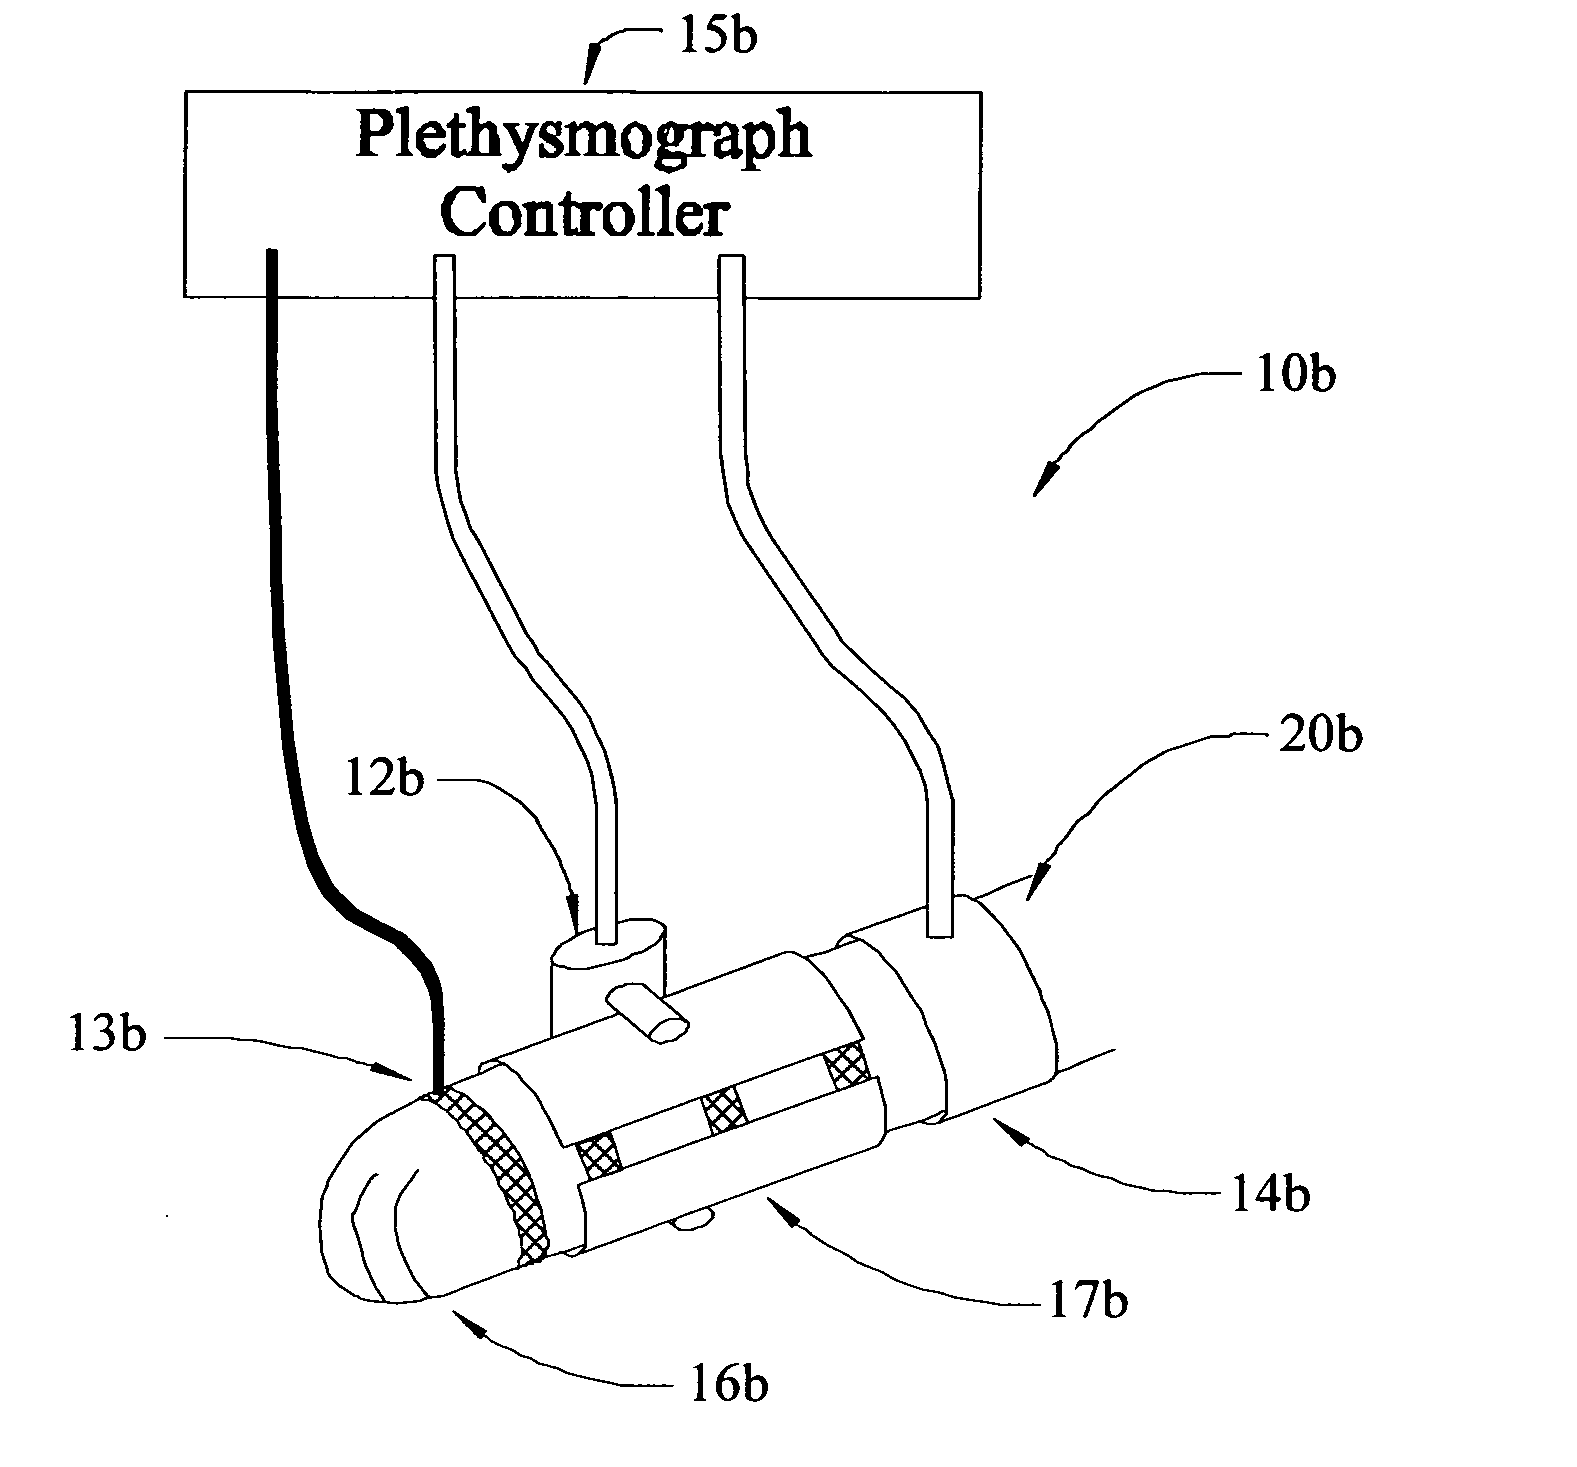 System and method of non-invasive blood pressure measurements and vascular parameter detection in small subjects